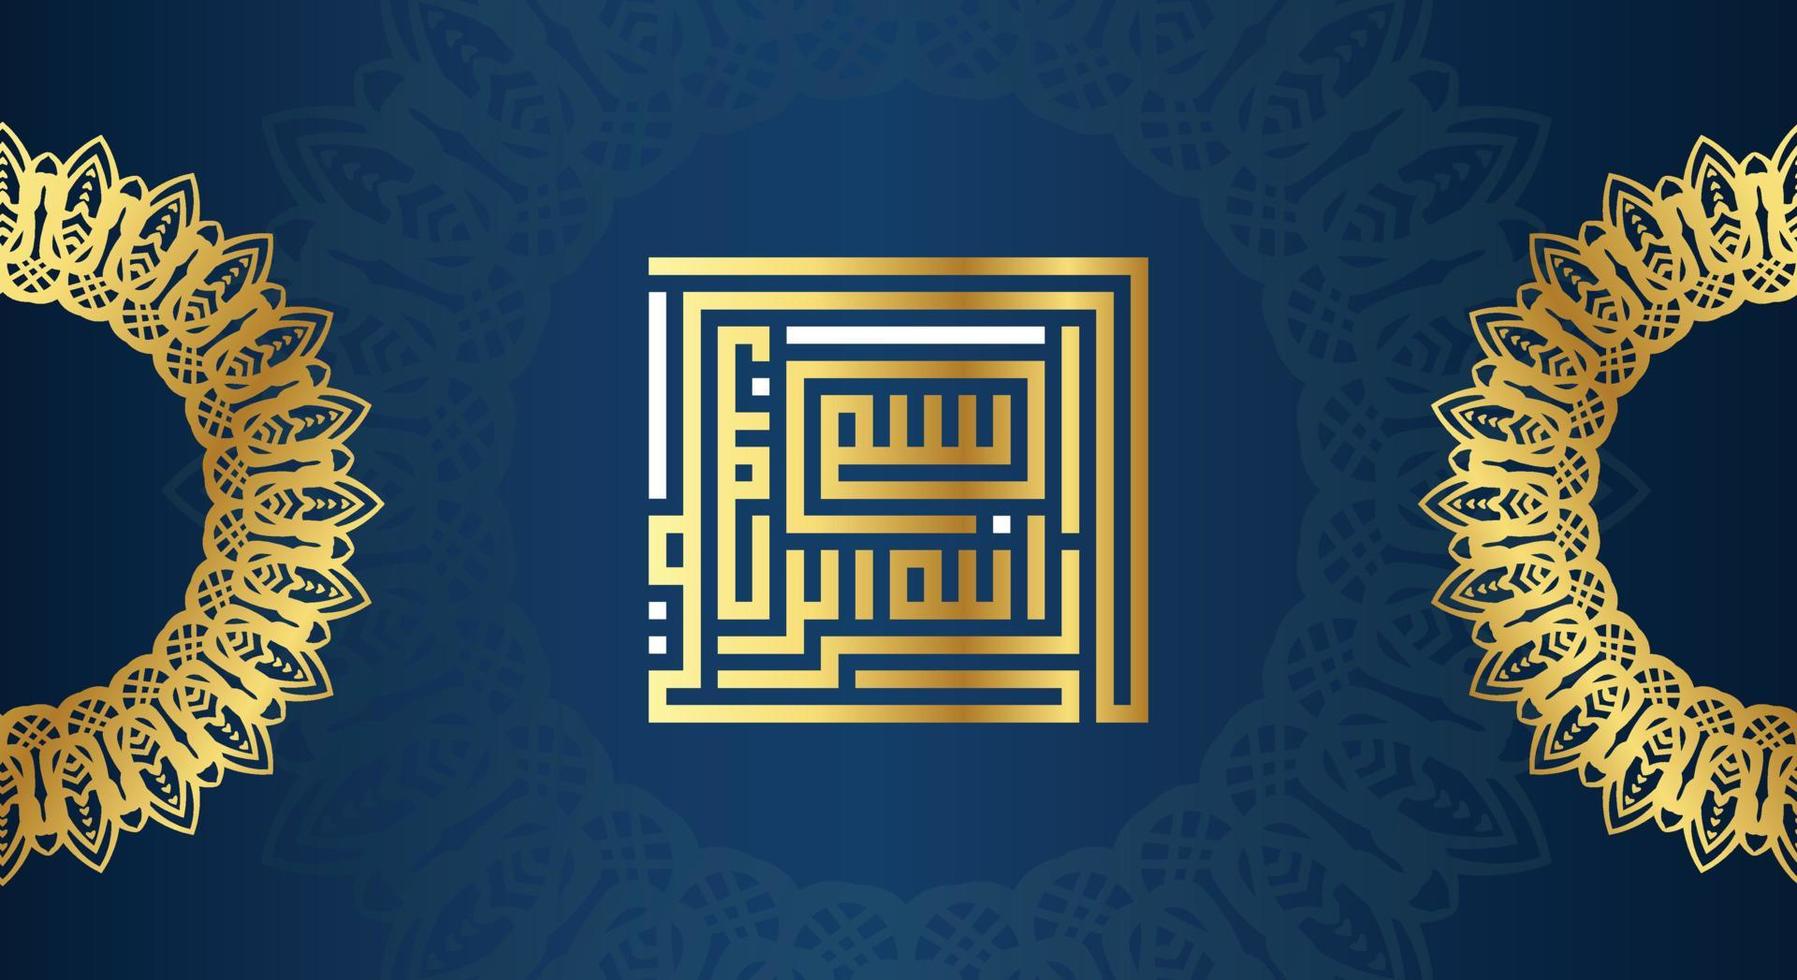 Arabic Calligraphy of Bismillah with golden color and blue background, the first verse of Quran, translated as In the name of God, the merciful, the compassionate. vector